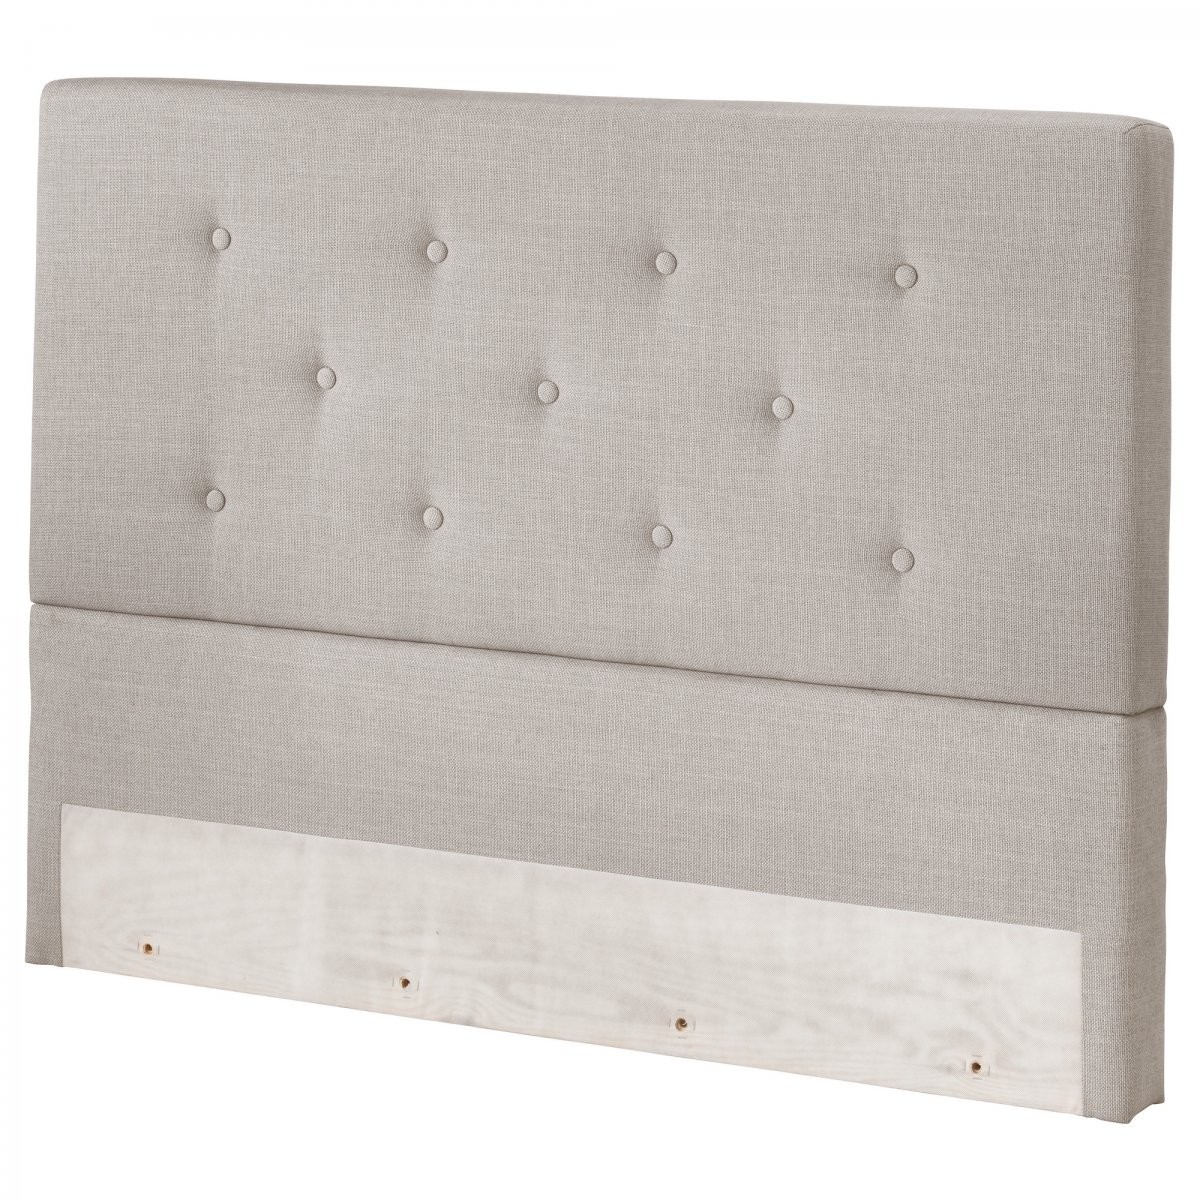 Headboard at ikea give your bedroom more storages and 1